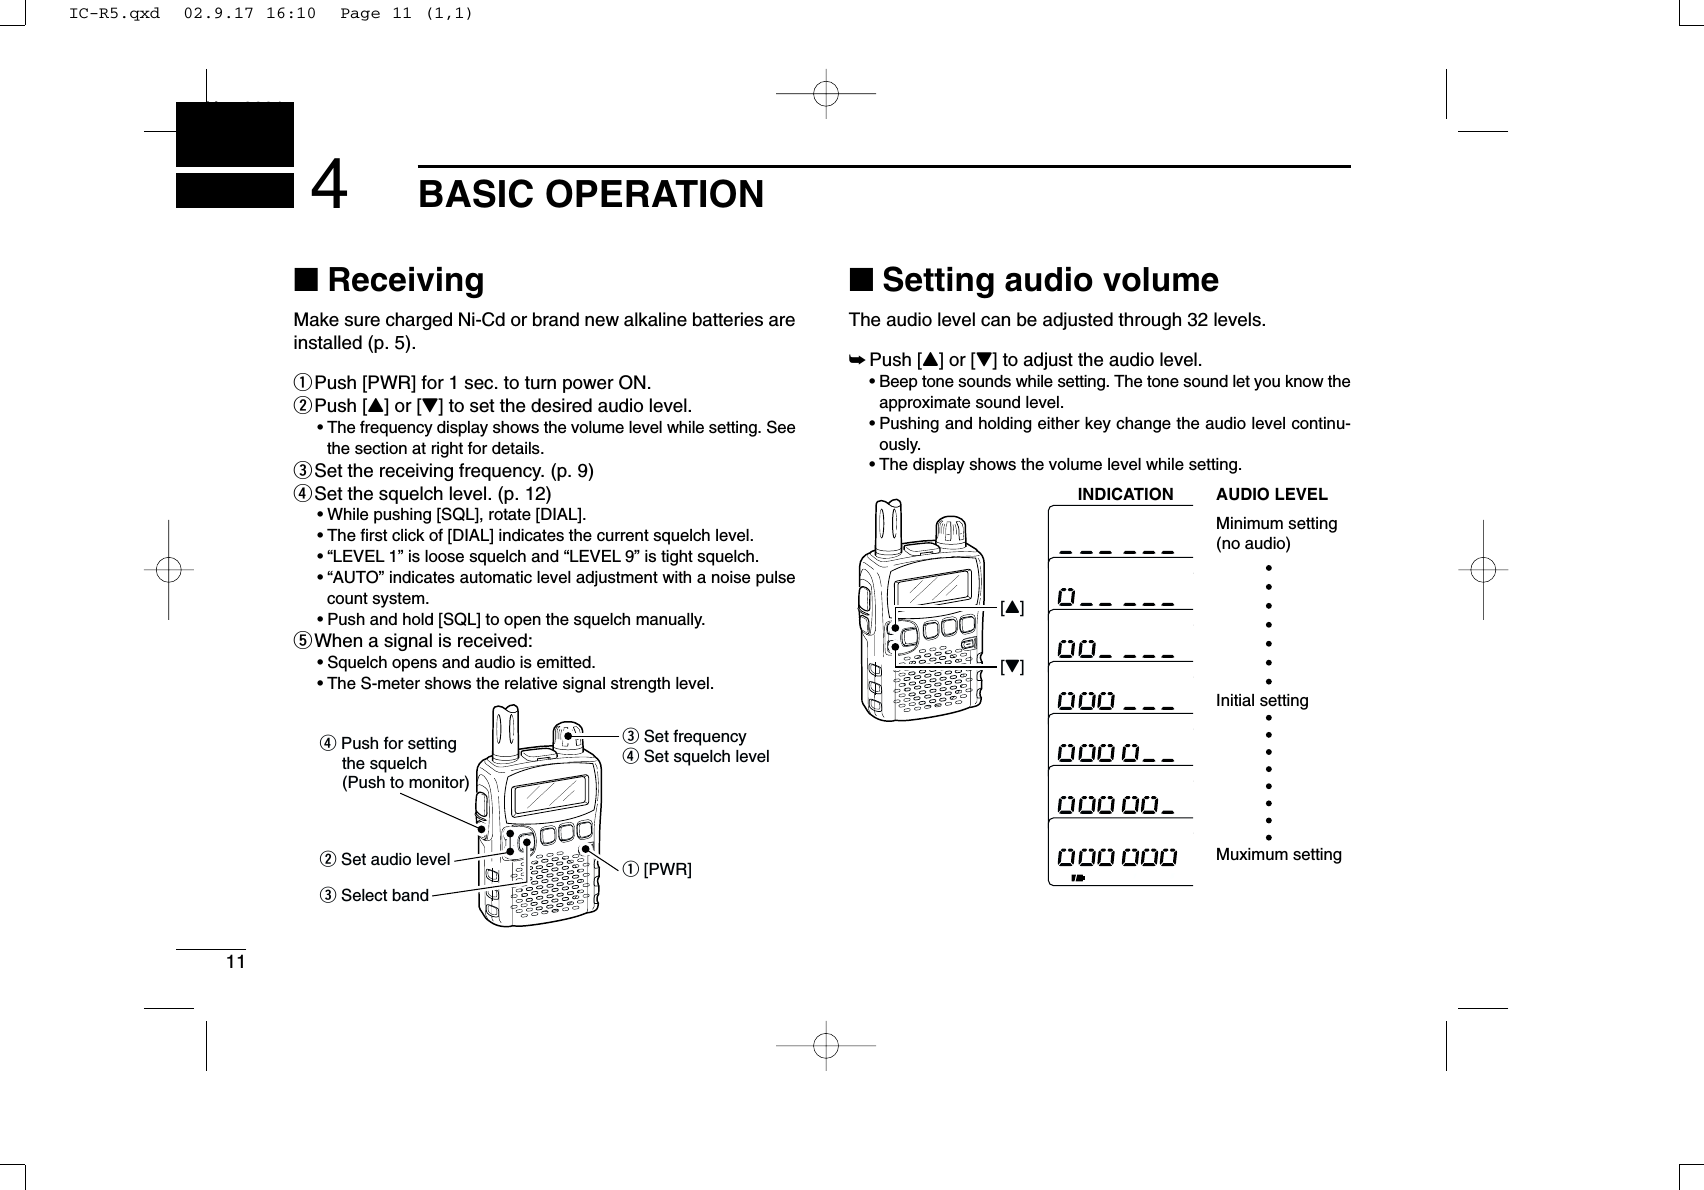 11BASIC OPERATIONNew20014■ReceivingMake sure charged Ni-Cd or brand new alkaline batteries areinstalled (p. 5).qPush [PWR] for 1 sec. to turn power ON.wPush [Y] or [Z] to set the desired audio level. •The frequency display shows the volume level while setting. Seethe section at right for details.eSet the receiving frequency. (p. 9)rSet the squelch level. (p. 12)•While pushing [SQL], rotate [DIAL].•The ﬁrst click of [DIAL] indicates the current squelch level.•“LEVEL 1” is loose squelch and “LEVEL 9” is tight squelch.•“AUTO” indicates automatic level adjustment with a noise pulsecount system.•Push and hold [SQL] to open the squelch manually.tWhen a signal is received:•Squelch opens and audio is emitted.•The S-meter shows the relative signal strength level.■Setting audio volumeThe audio level can be adjusted through 32 levels.➥Push [Y] or [Z] to adjust the audio level. •Beep tone sounds while setting. The tone sound let you know theapproximate sound level.•Pushing and holding either key change the audio level continu-ously.•The display shows the volume level while setting.[Z][Y]INDICATION AUDIO LEVELMinimum setting(no audio)Muximum settingInitial settingq [PWR]e Set frequencyr Set squelch levelw Set audio levele Select bandr Push for setting    the squelch    (Push to monitor)IC-R5.qxd  02.9.17 16:10  Page 11 (1,1)